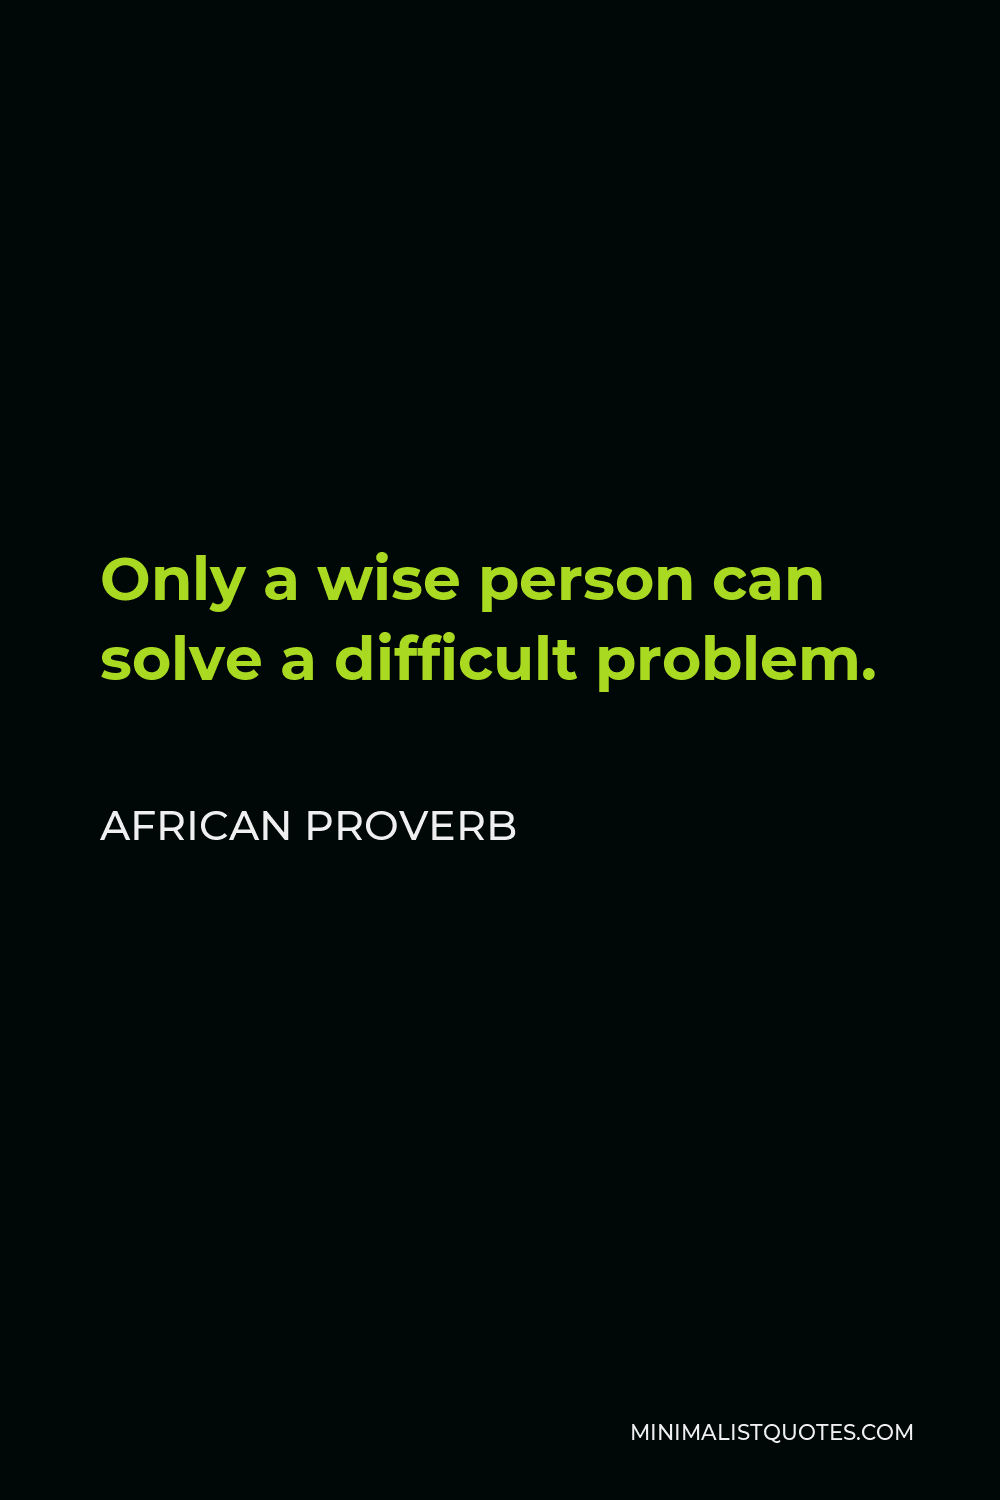 African Proverb Quote - Only a wise person can solve a difficult problem.